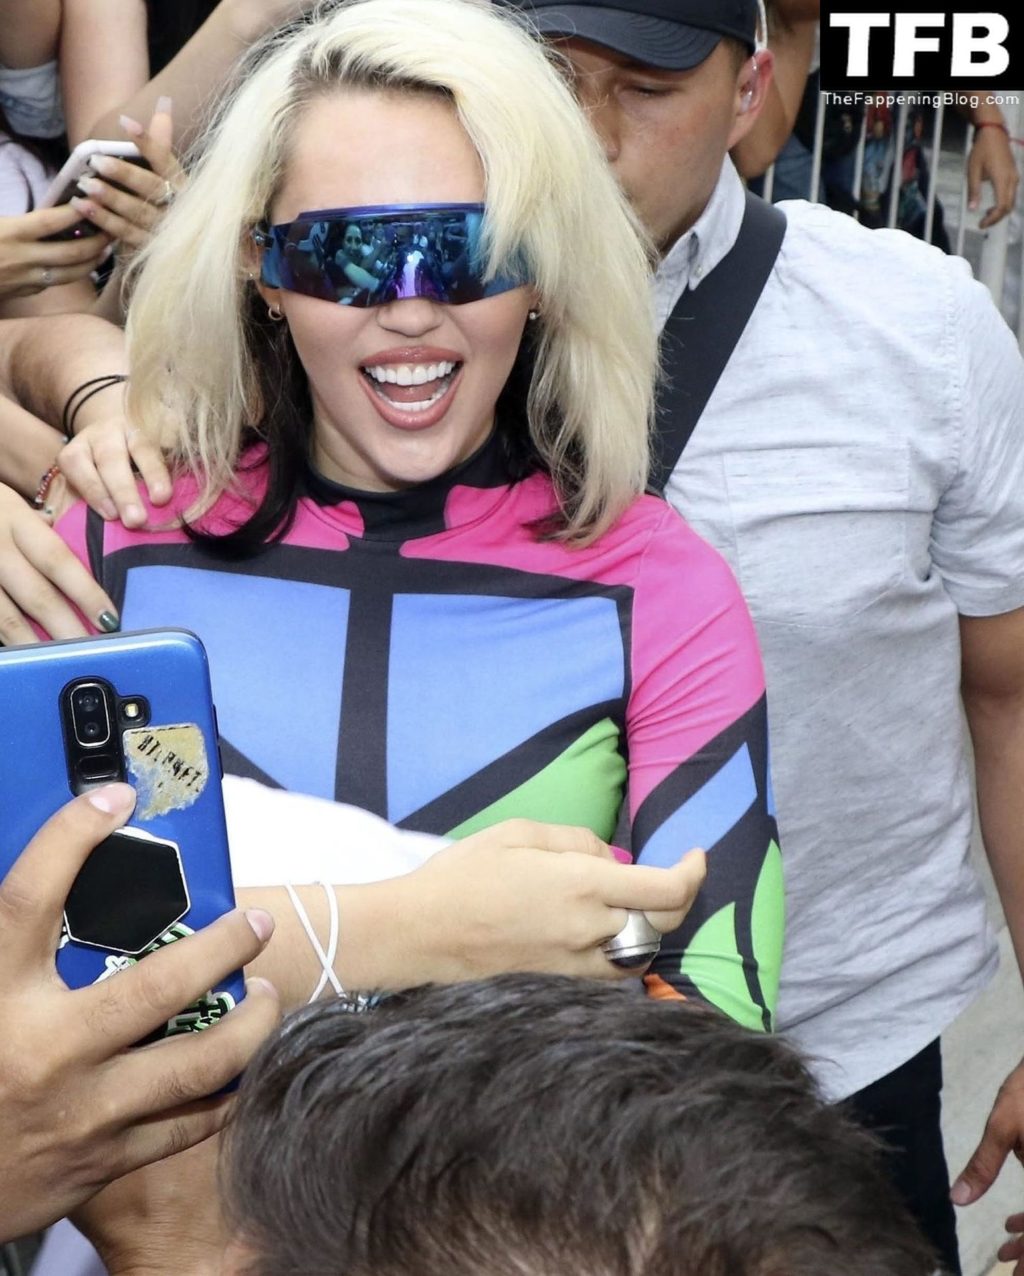 Miley Cyrus Sexy The Fappening Blog 10 1 1024x1276 - Miley Cyrus Greets Her Fans as She Arrives in Argentina to Attend the Lollapalooza Festival (27 Photos)